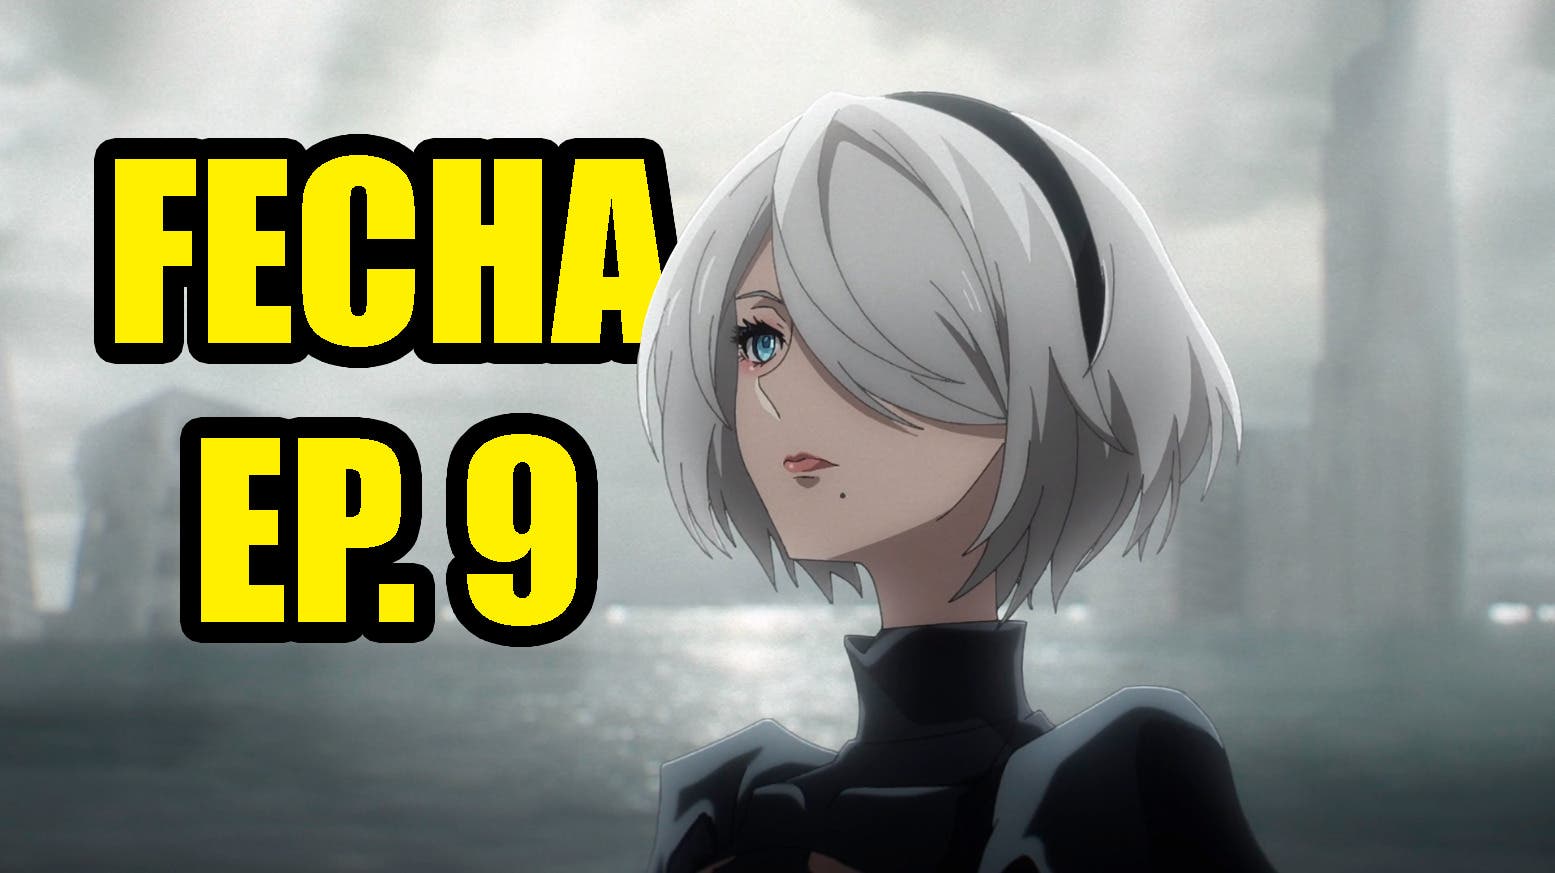 NieR Automata Ver1.1a: Schedule and Where to Watch Episode 9